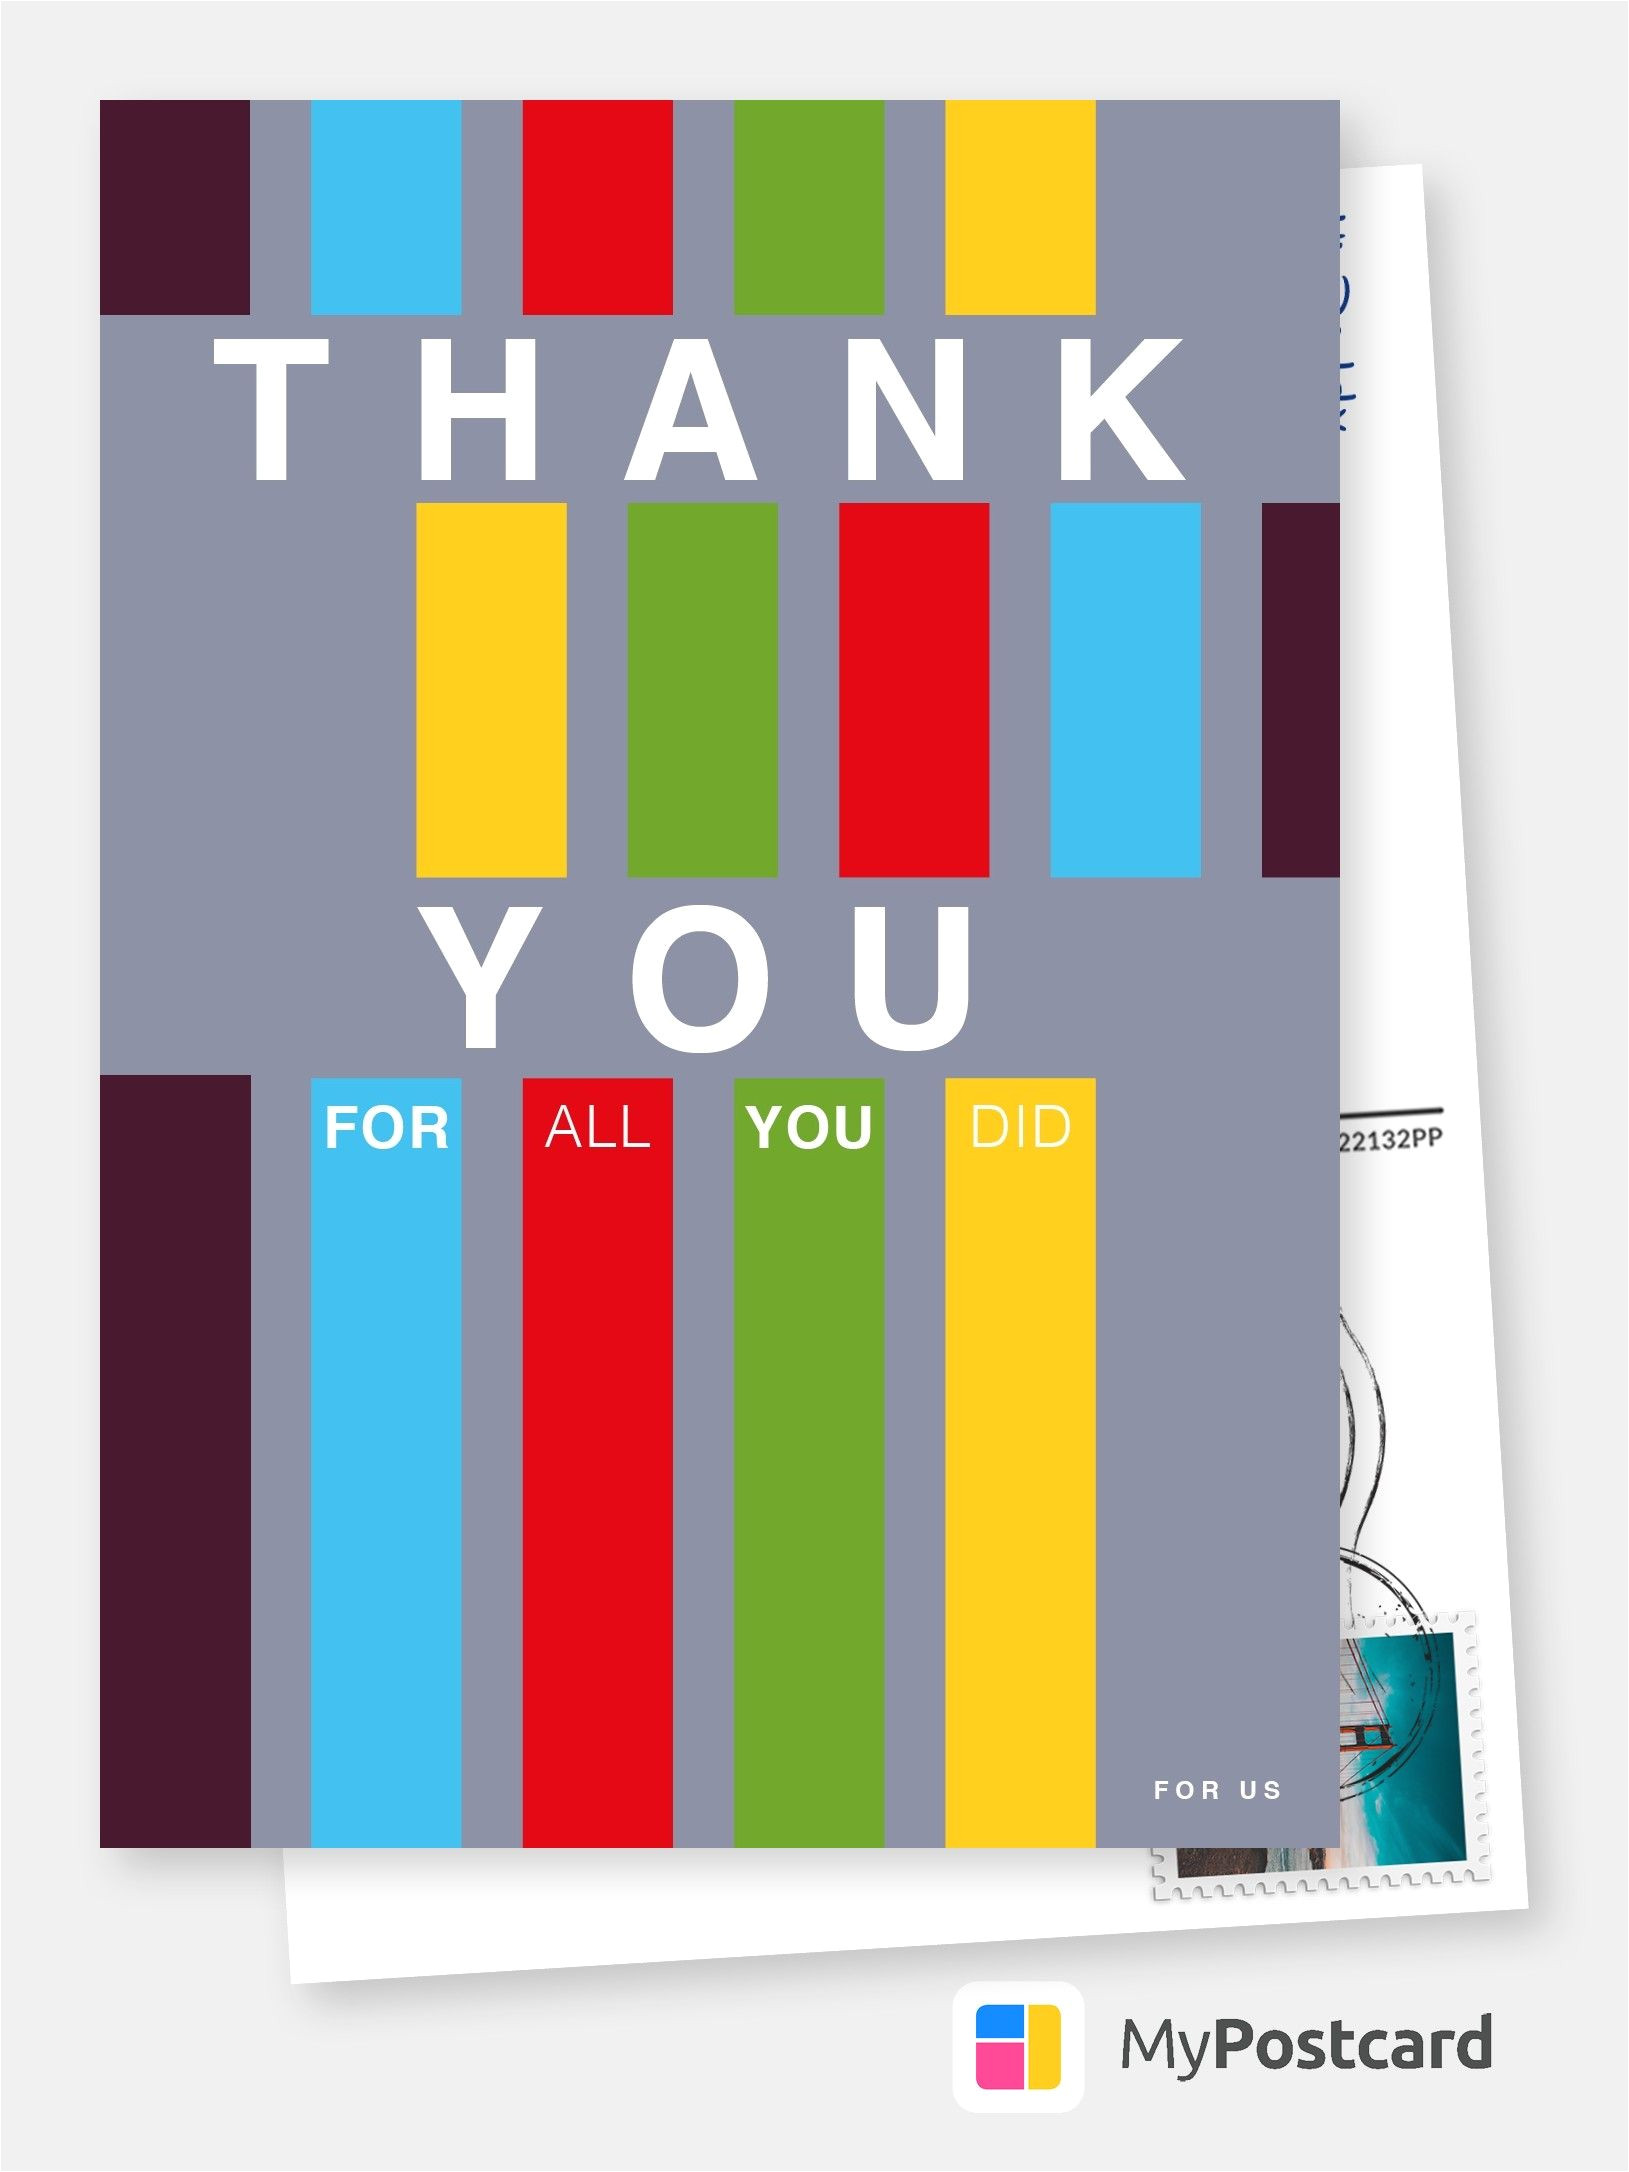 Thank You Message for Gift Card Thank You for All You Did Ermutigungskarten Spruche